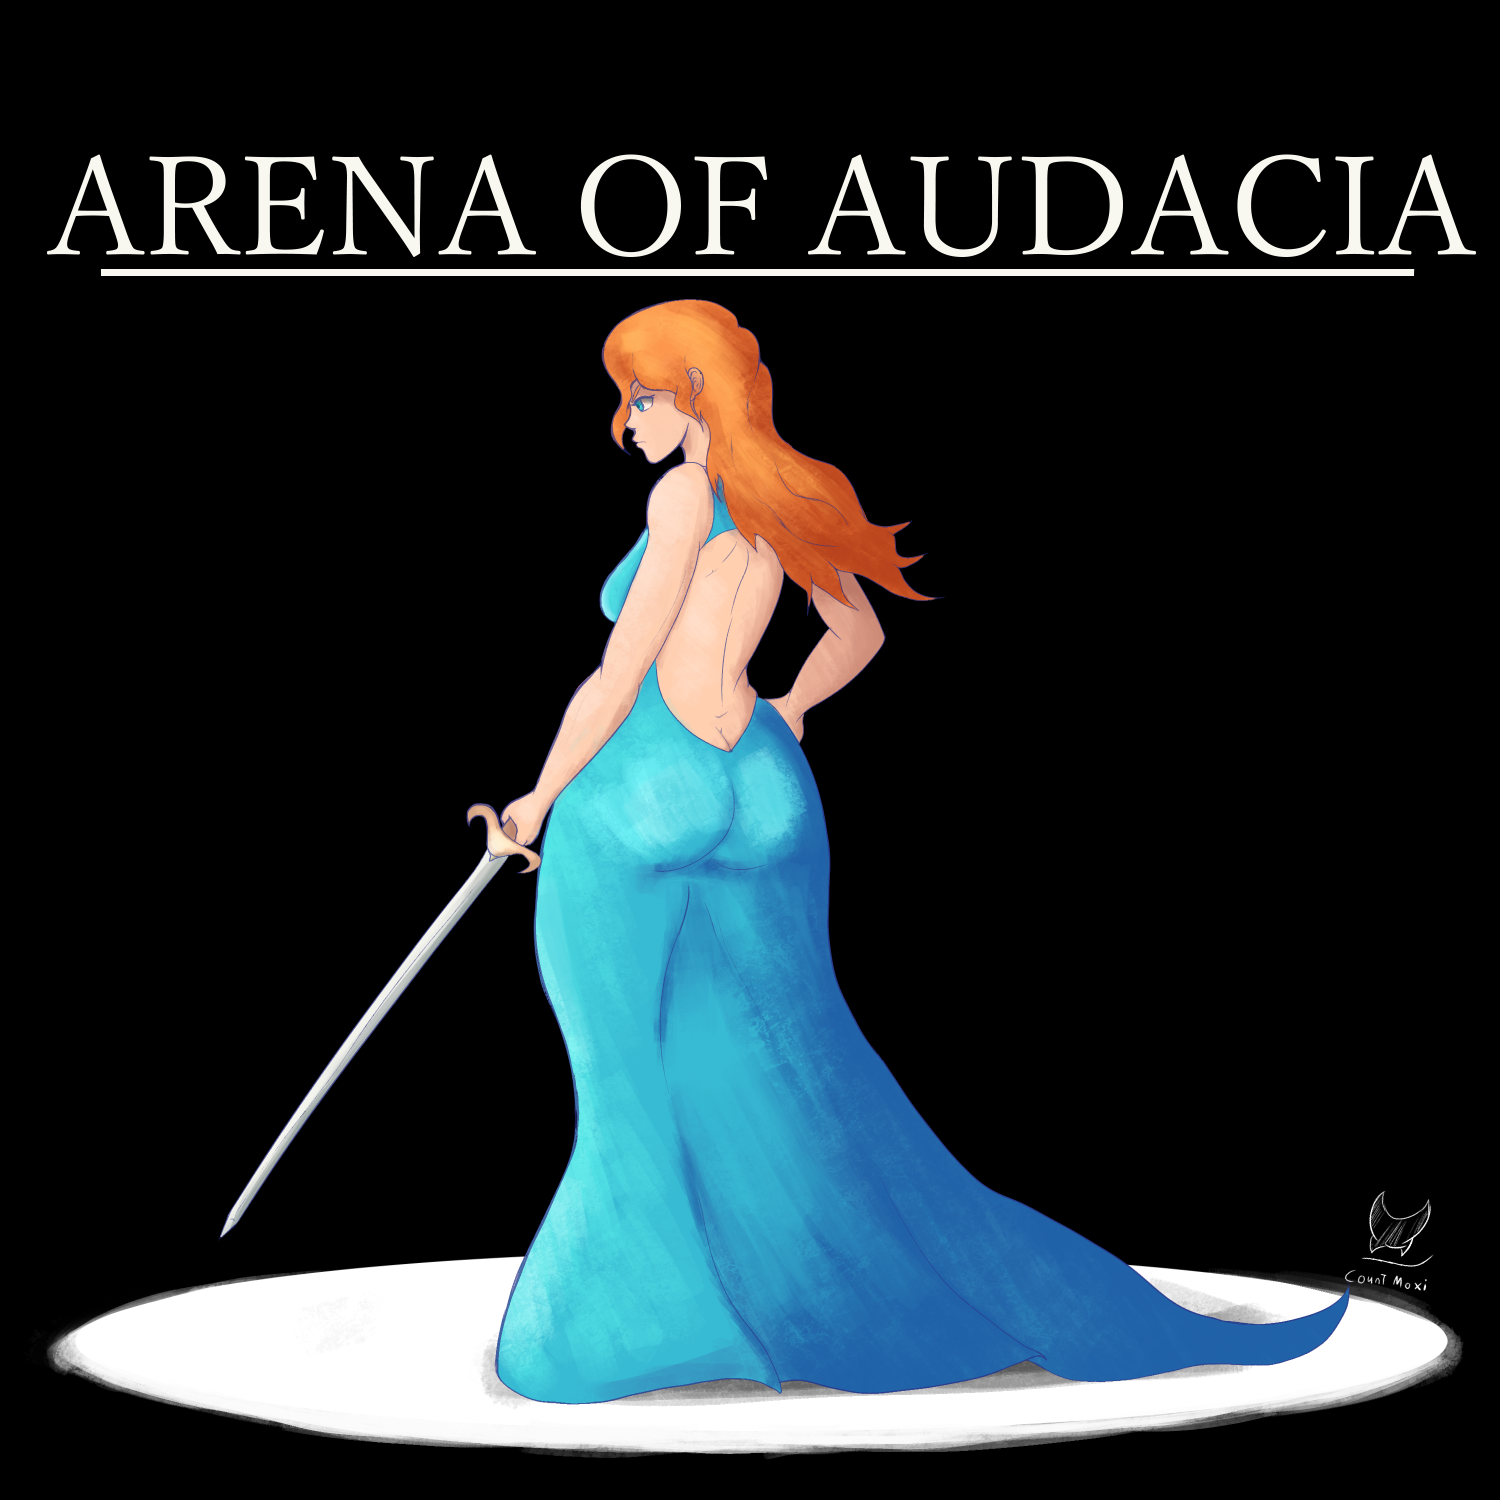 cindy siska recommends Arena Of Audacia